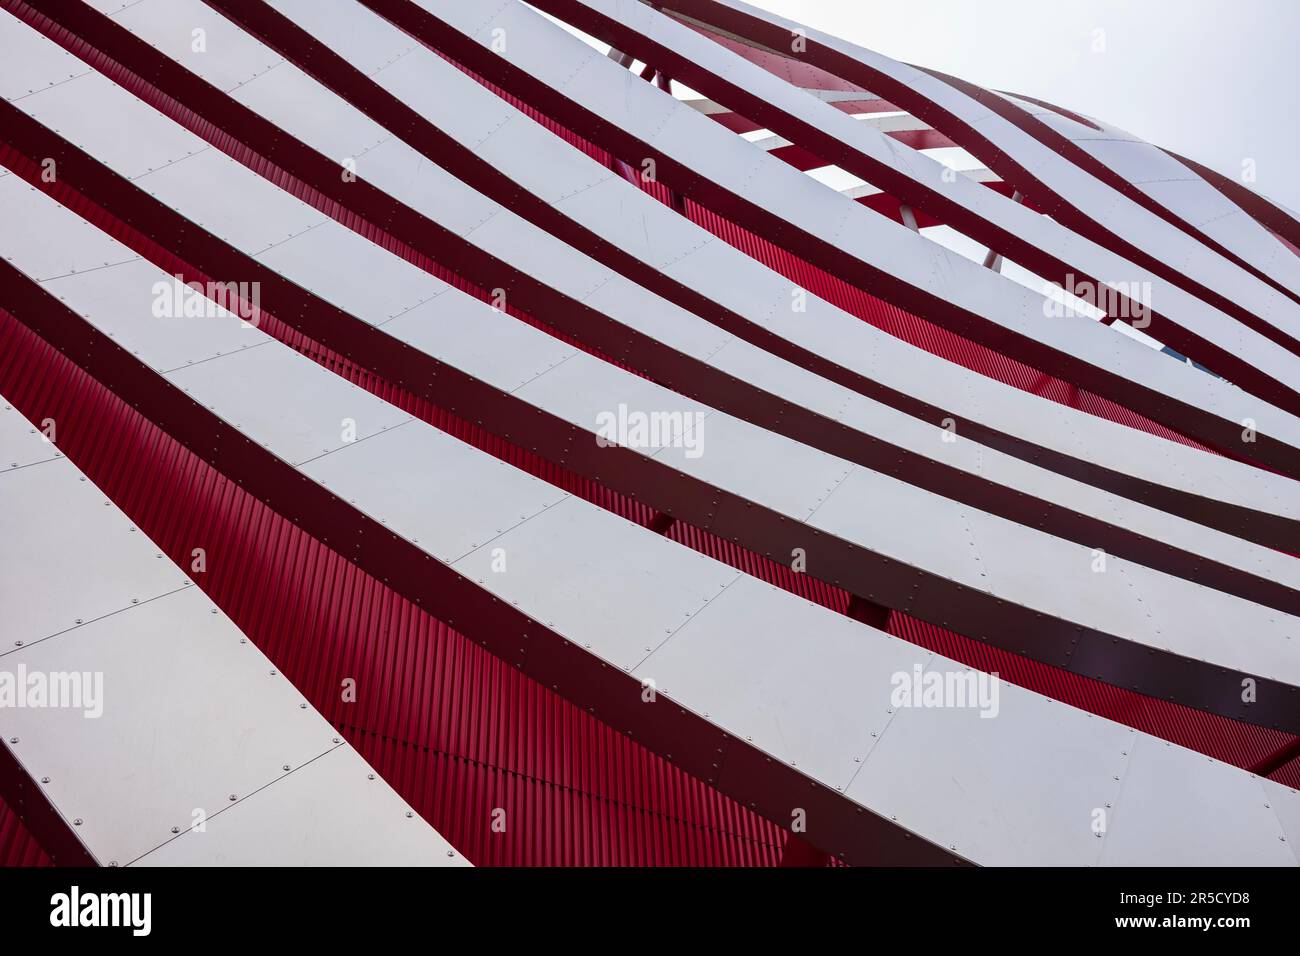 Los Angeles, CA, USA - Dec 26, 2022: The Petersen Automotive Museum has an unique architectural feature of aluminum ribbons to evoke a sense of speed Stock Photo